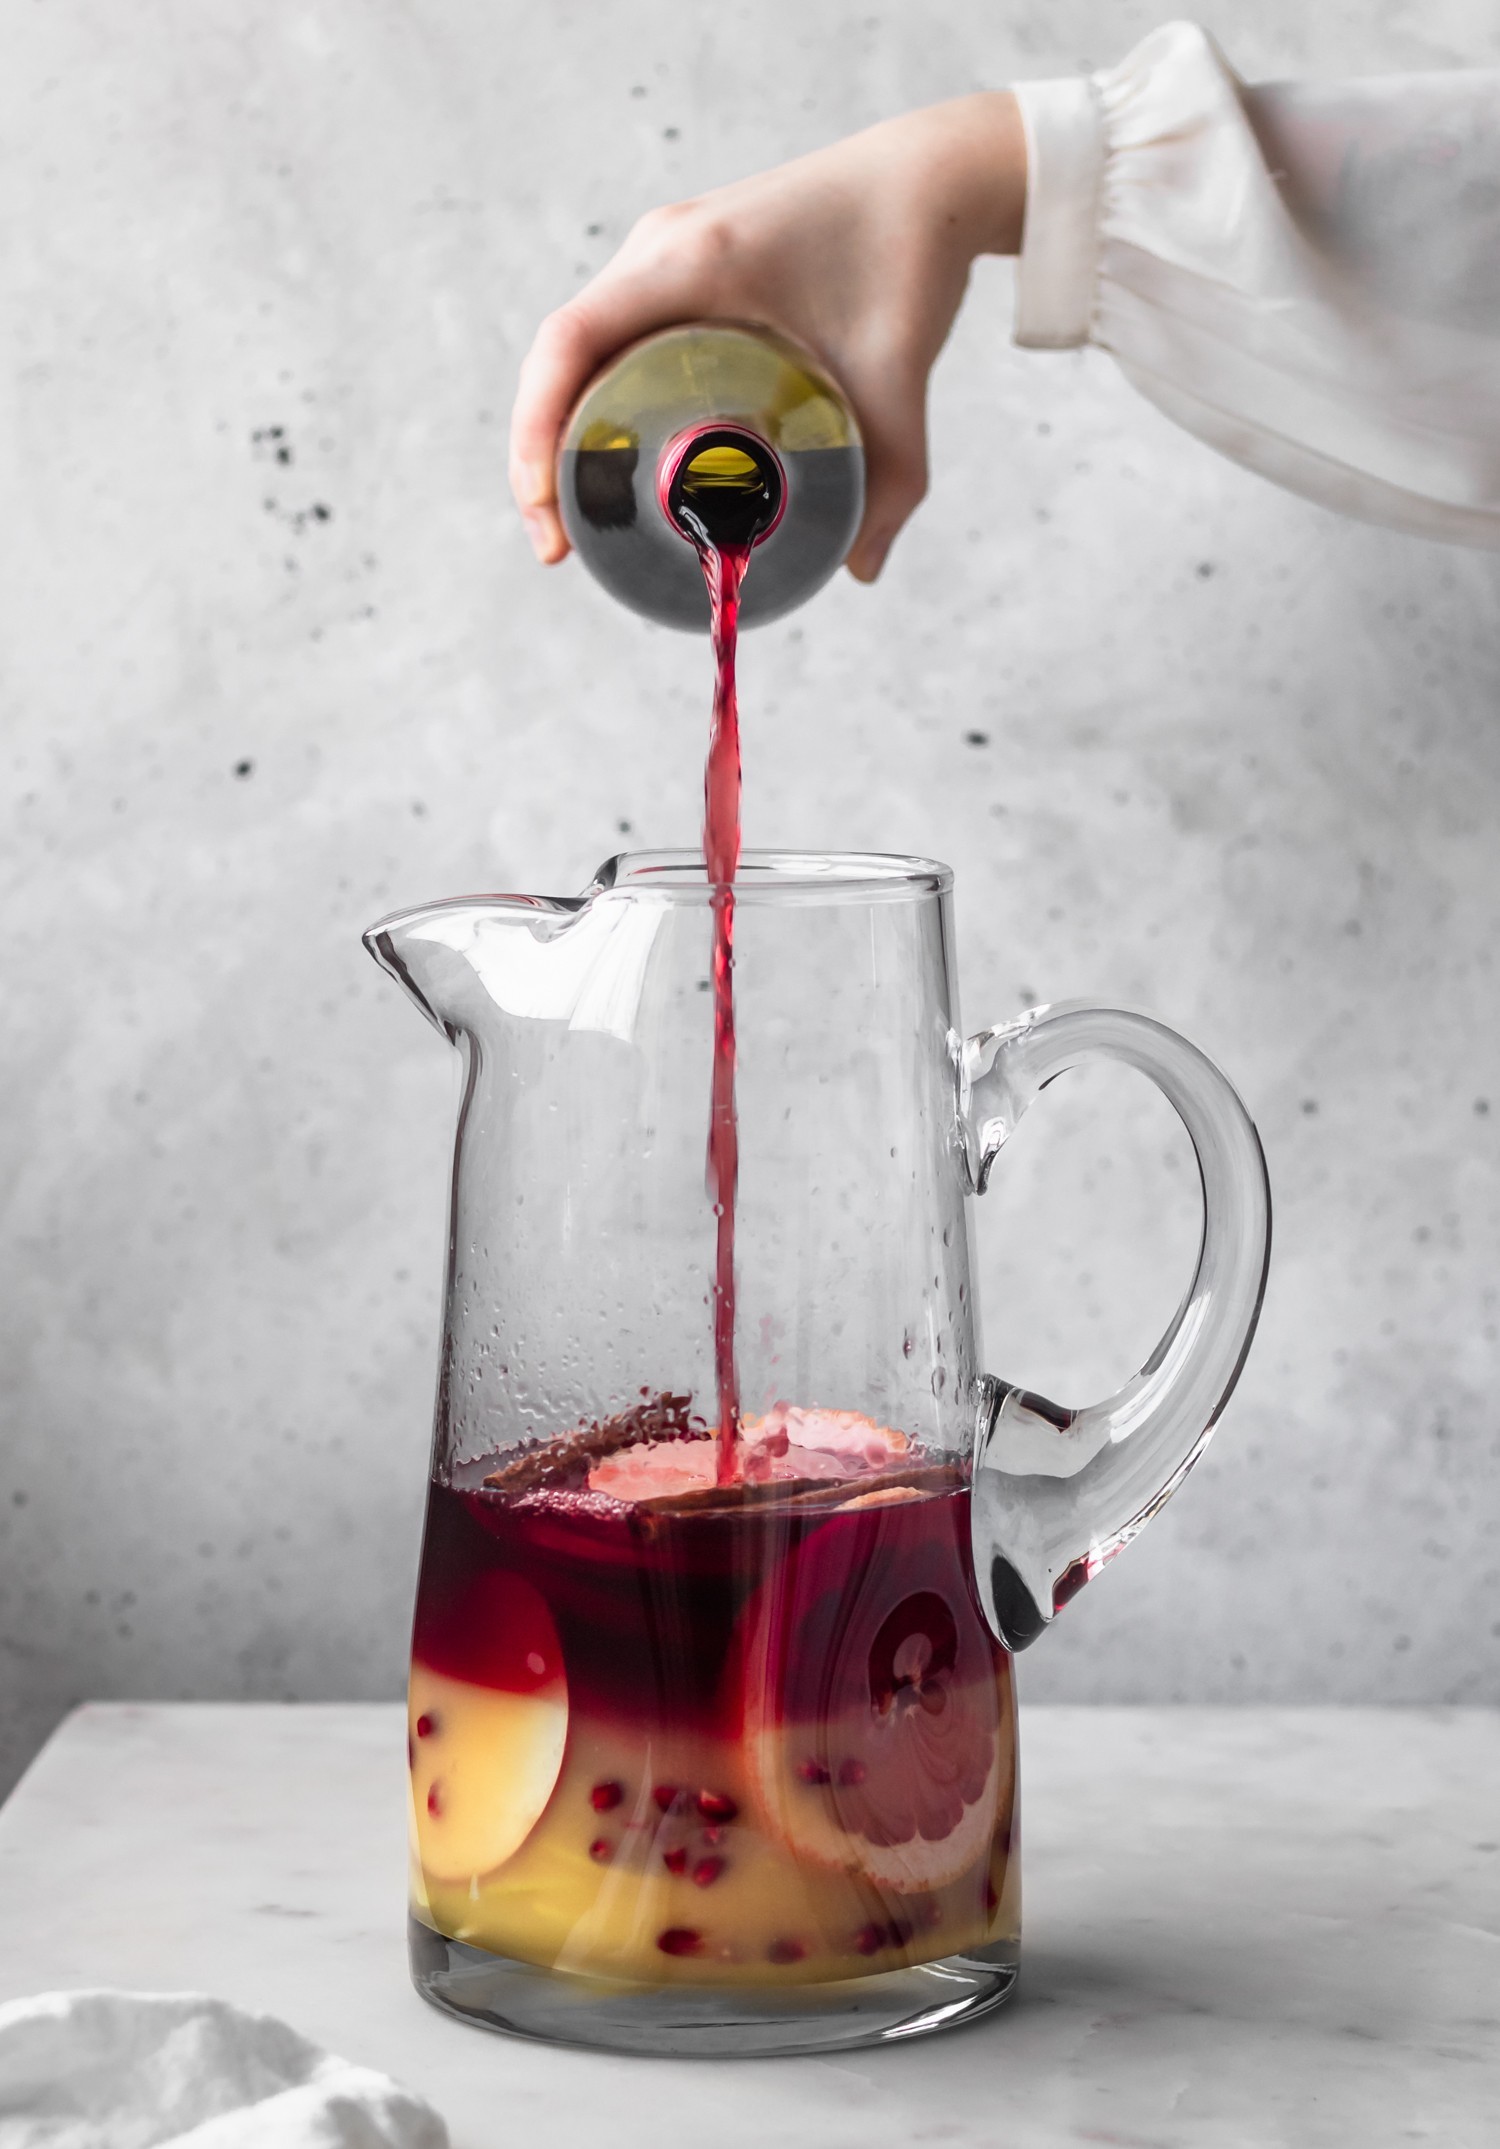 A side image of a woman's hand pouring red wine into a pitcher on a marble counter with a grey background.